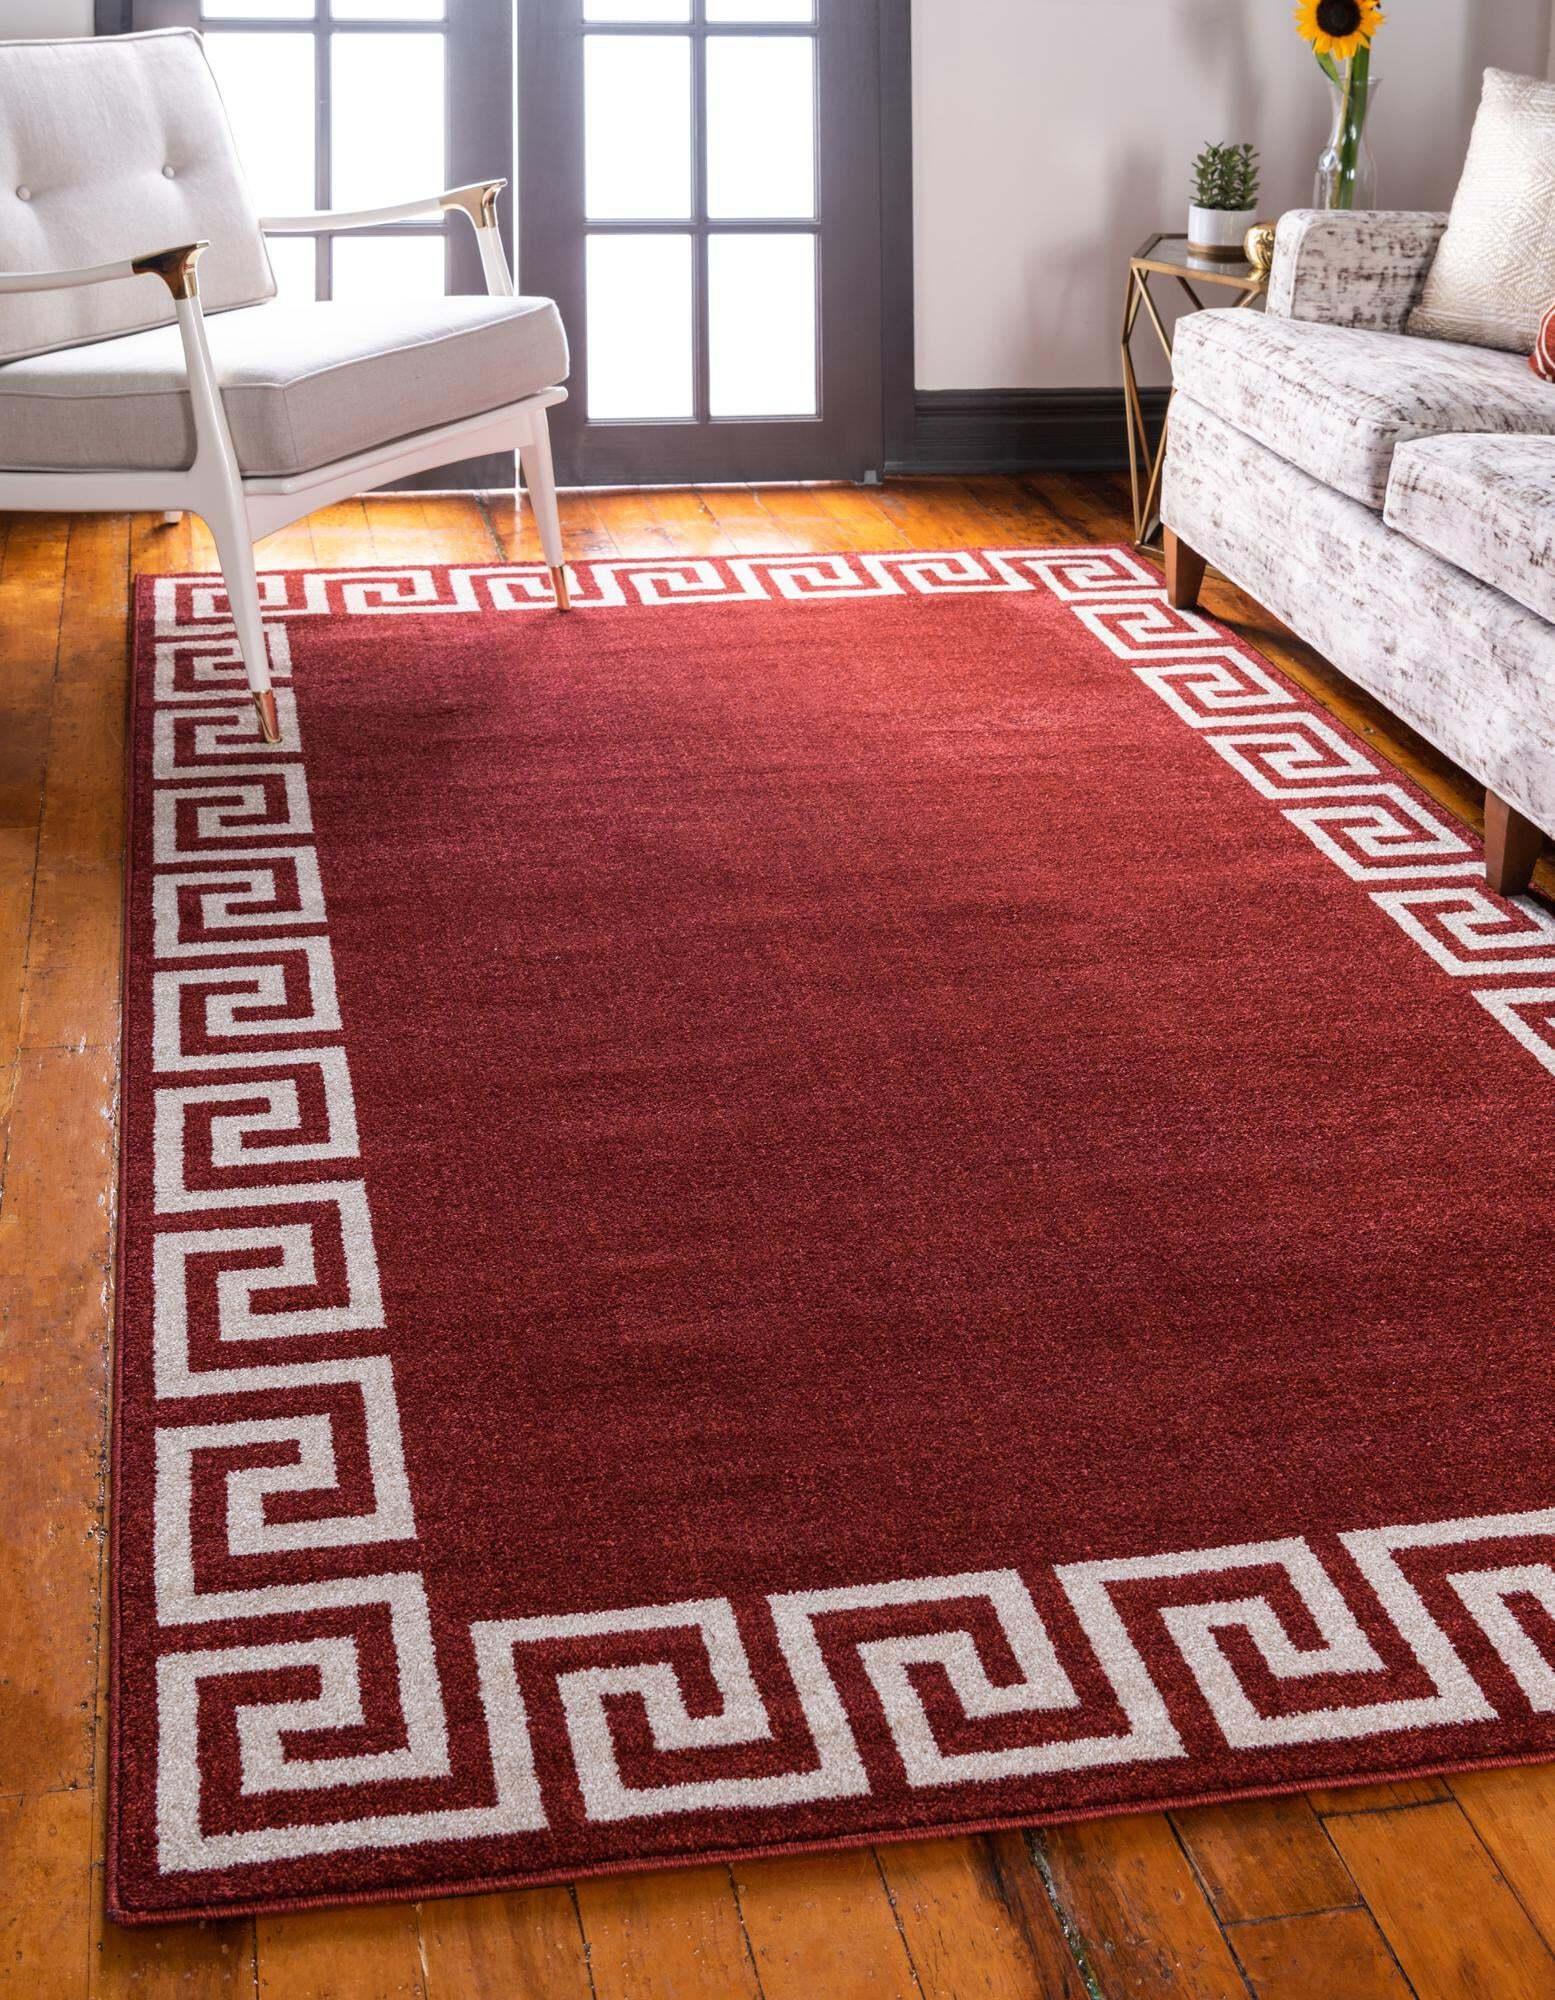 Unique Loom Indoor Rugs - Athens 9' x 12' Rectangle Rug Burgundy